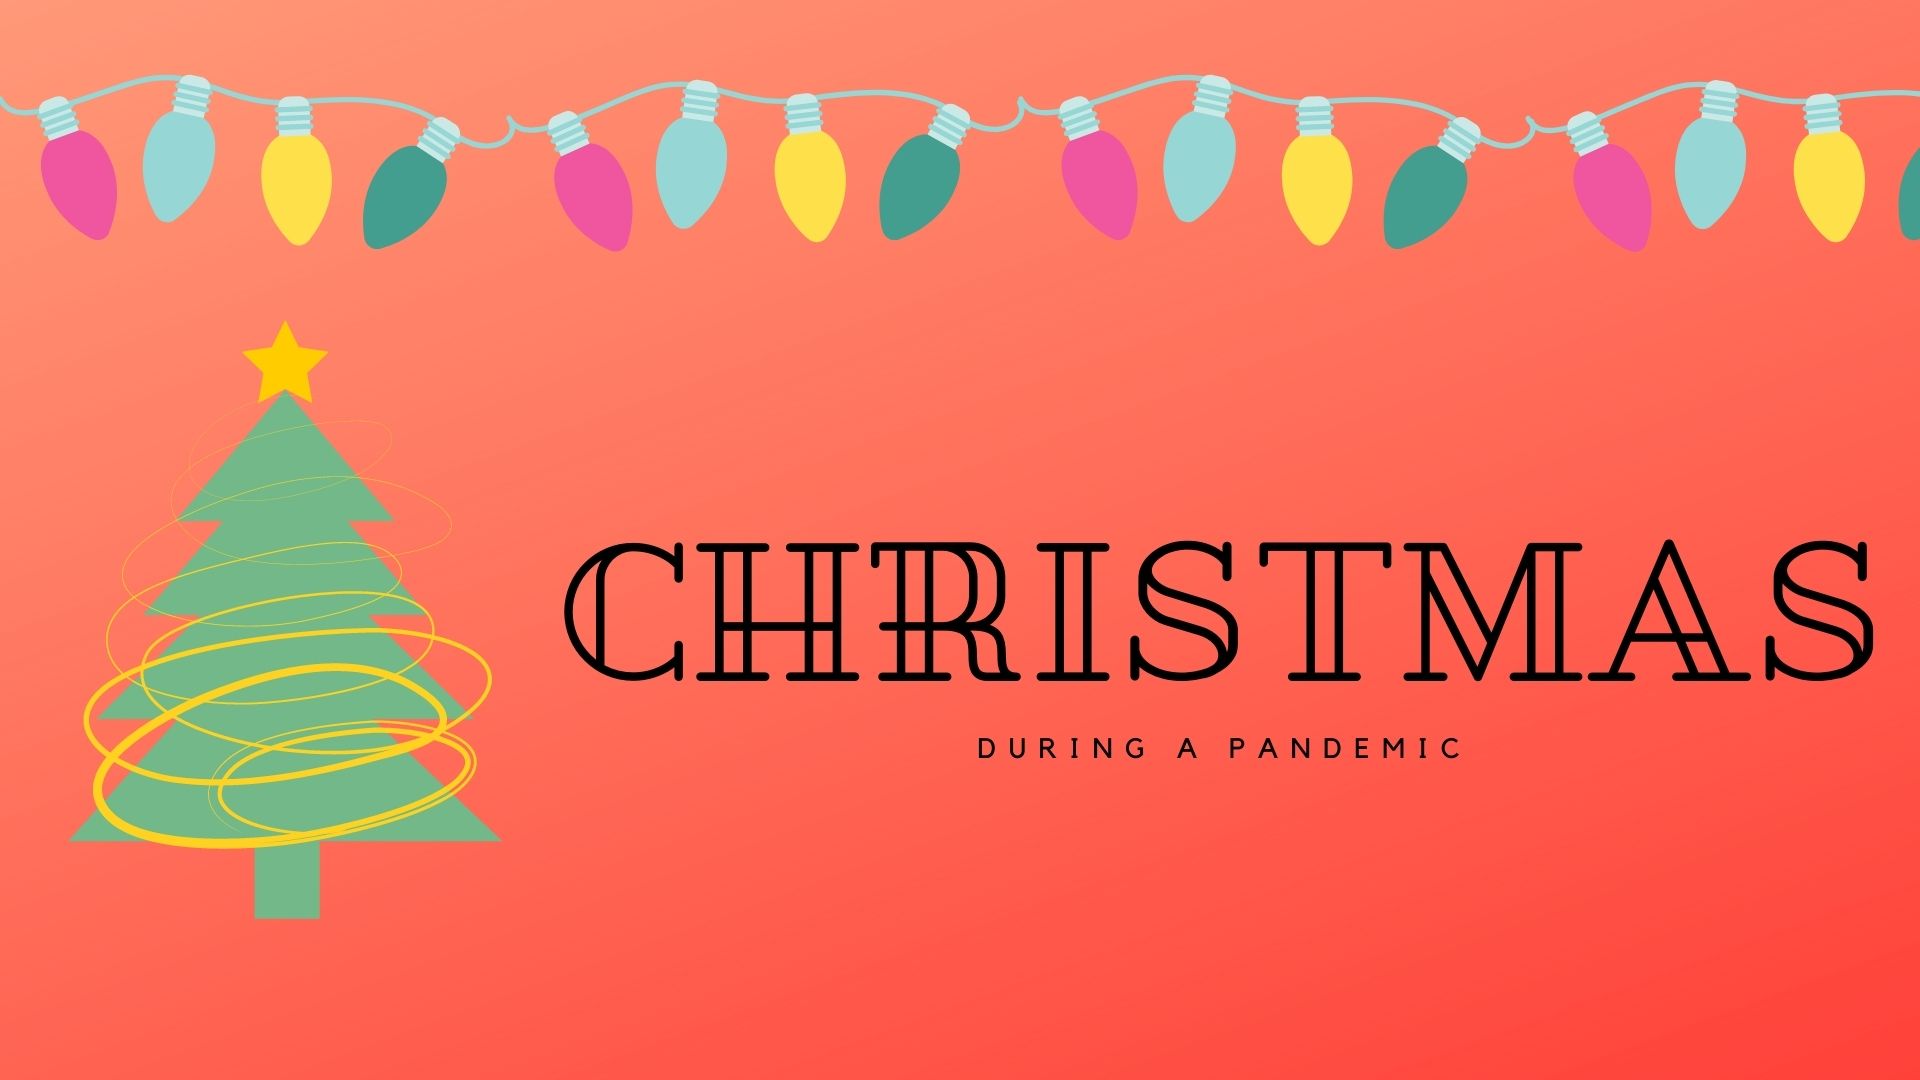 Red background with Christmas lights and a Christmas tree. “Christmas During A Pandemic” in black lettering